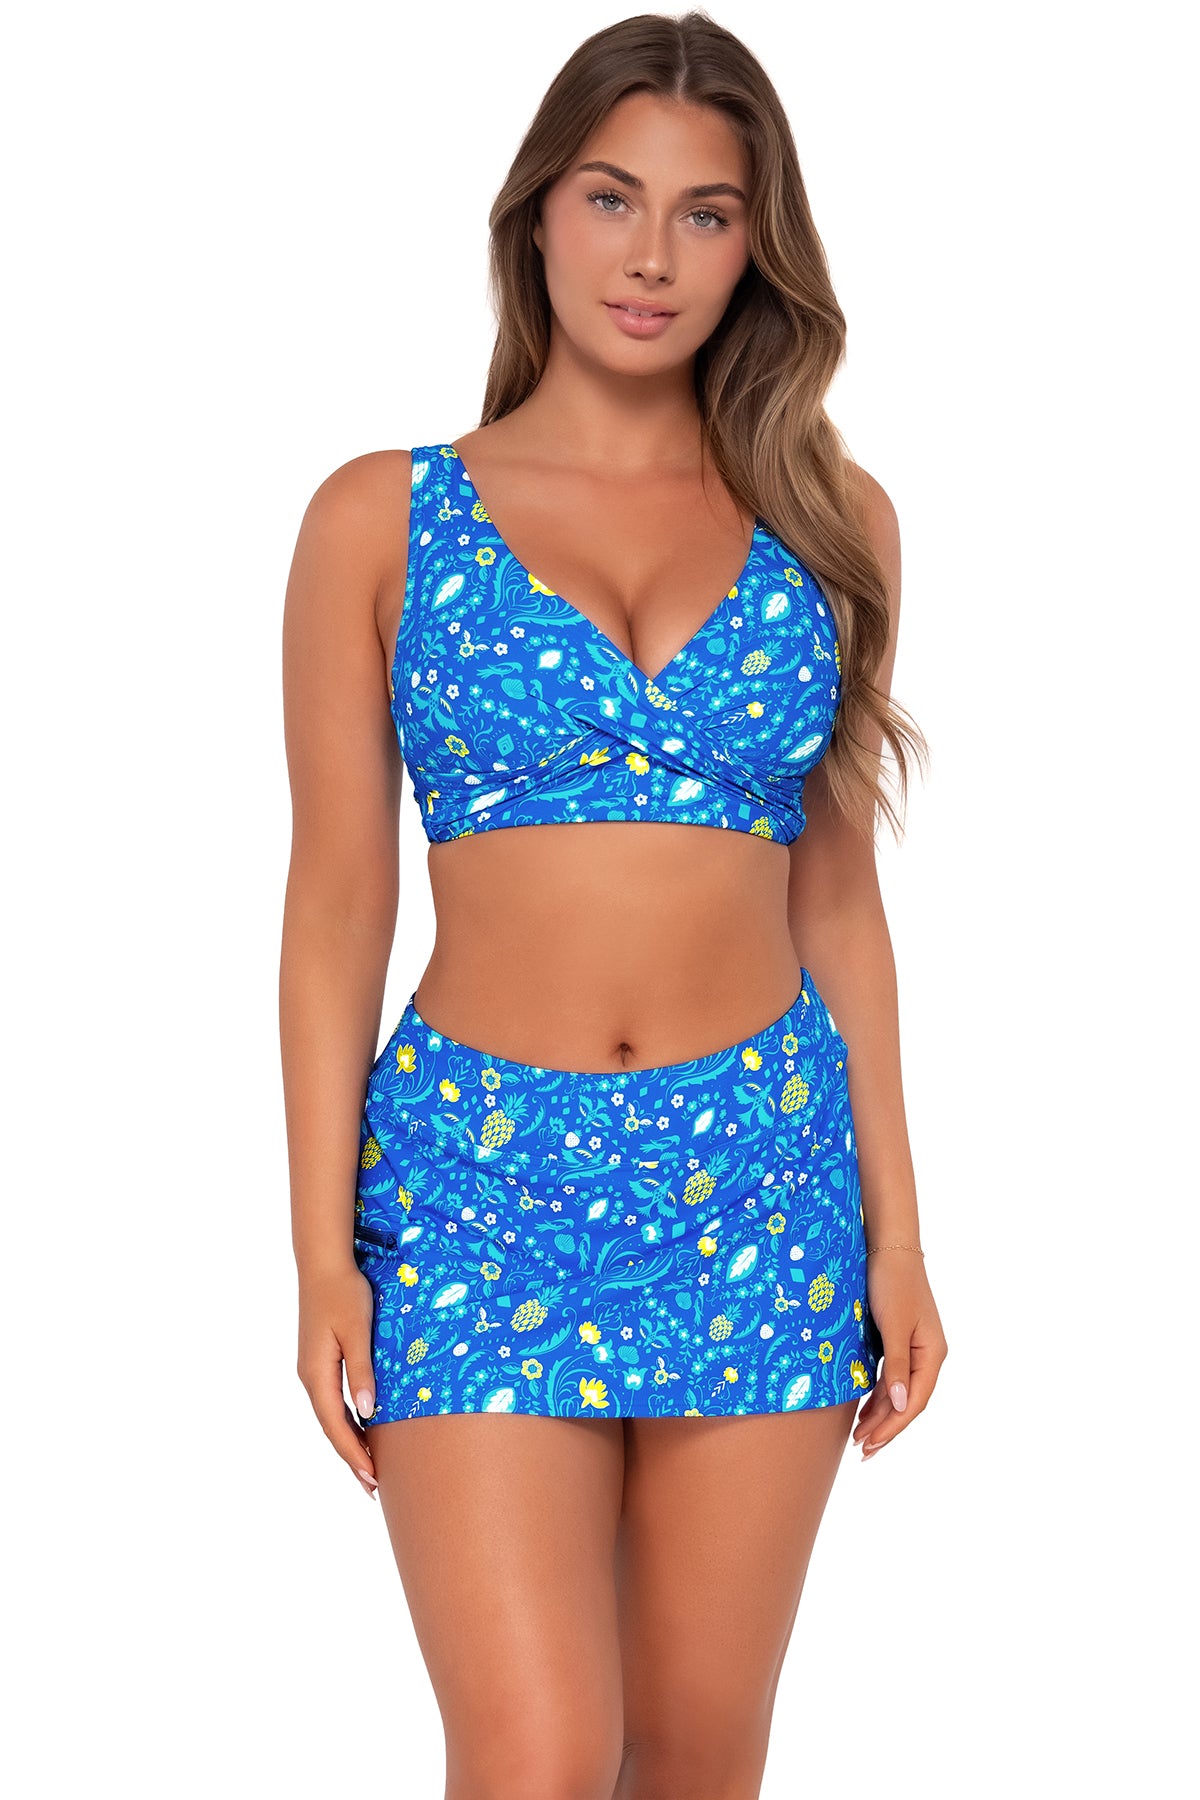 Front pose #1 of Taylor wearing Sunsets Pineapple Grove Sporty Swim Skirt with matching Elsie Top bikini bralette